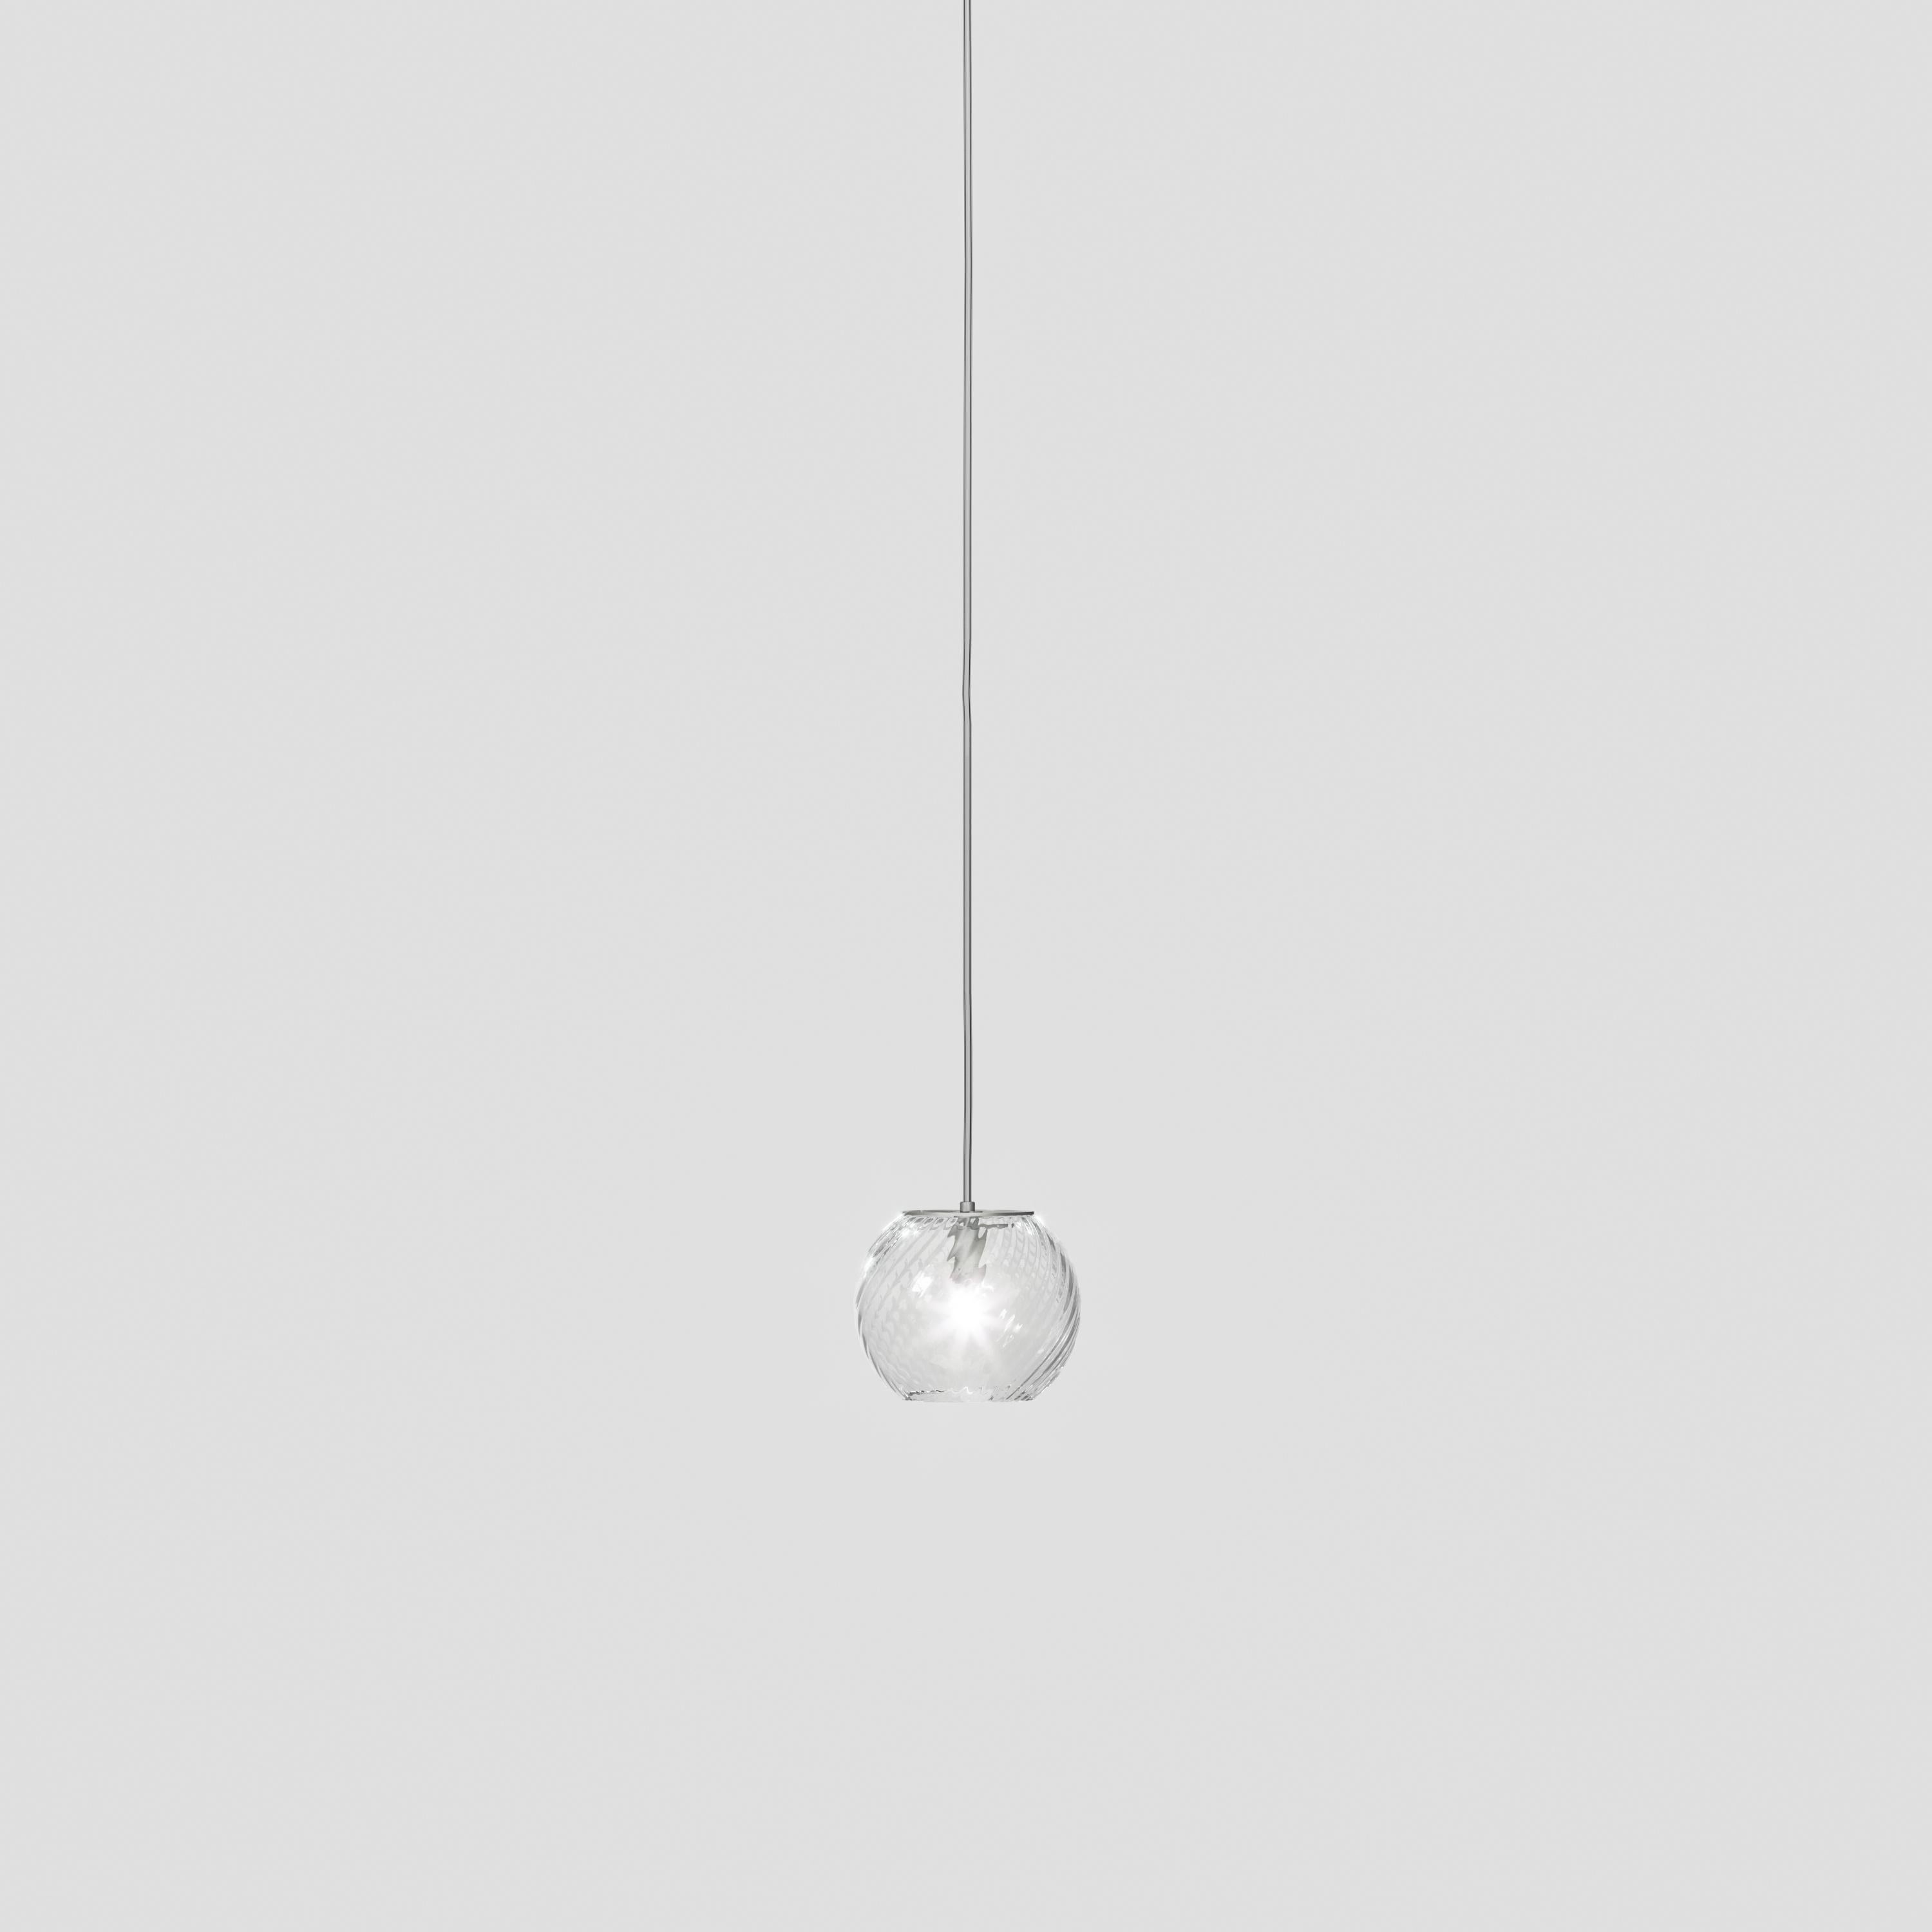 Spherical blown glass elements available in four sizes and two decorations, with and without lighting source. The special design allows the installation of more vertical glass elements and infinite custom combinations.

Light Source: 
1x60W G9.
 